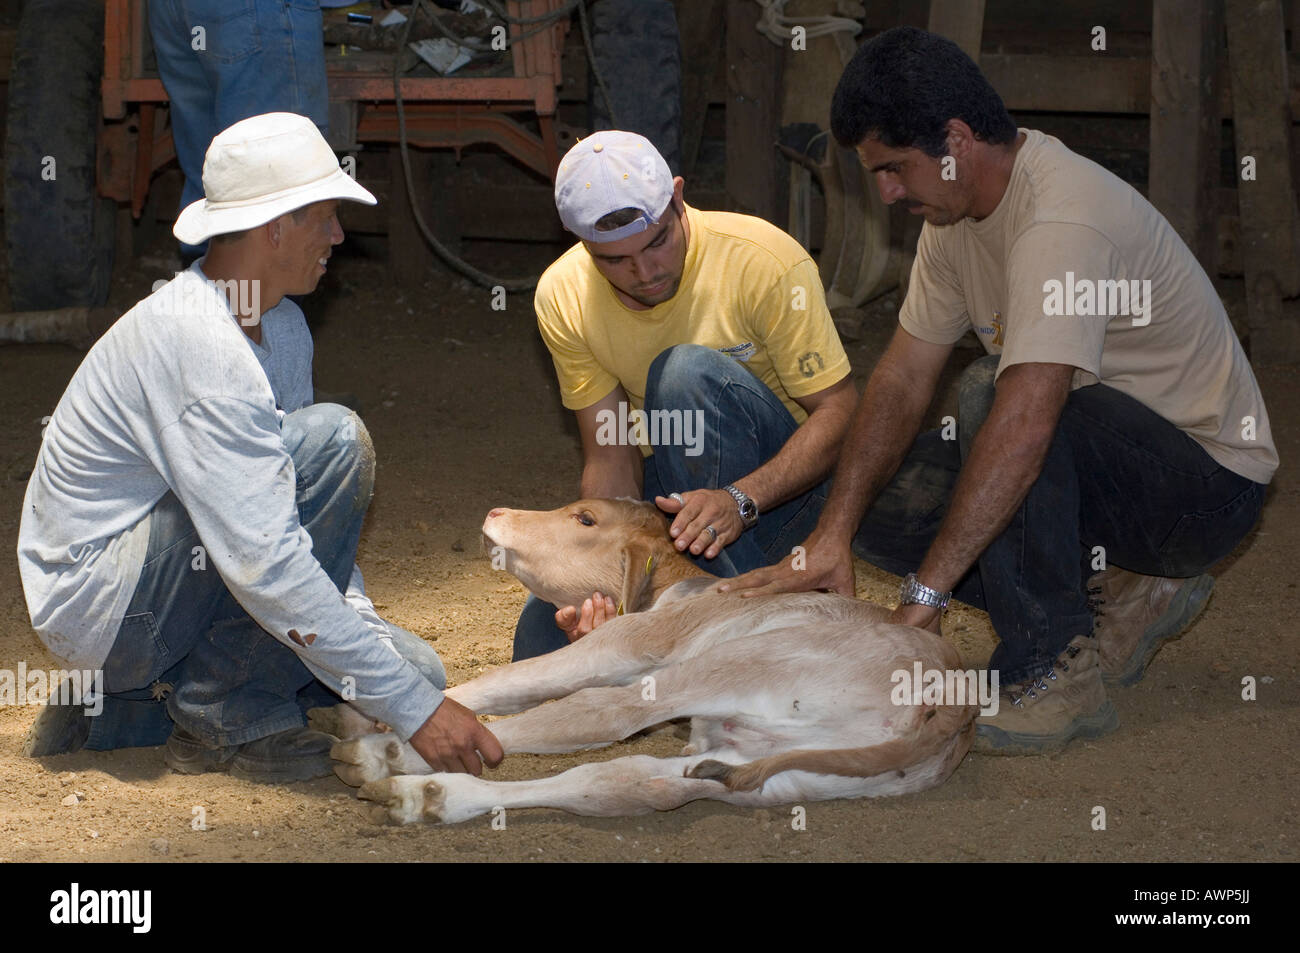 Calf laying down, about to be branded and ear-tagged, Costa Rica, Central America Stock Photo